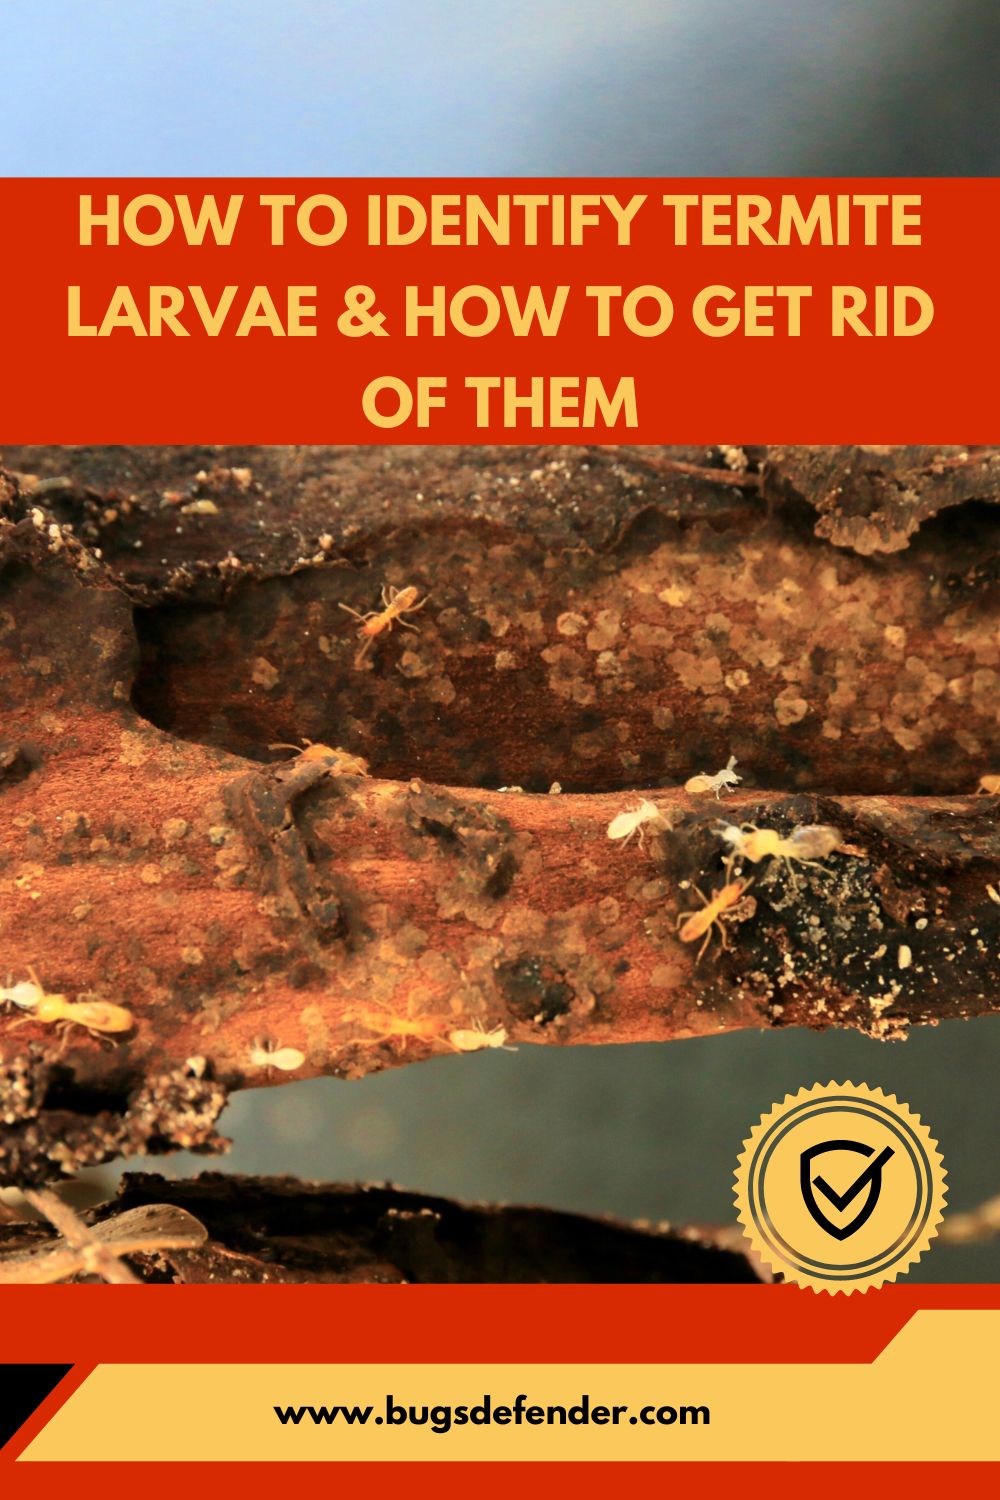 How To Identify Termite Larvae & How To Get Rid Of Them pin1